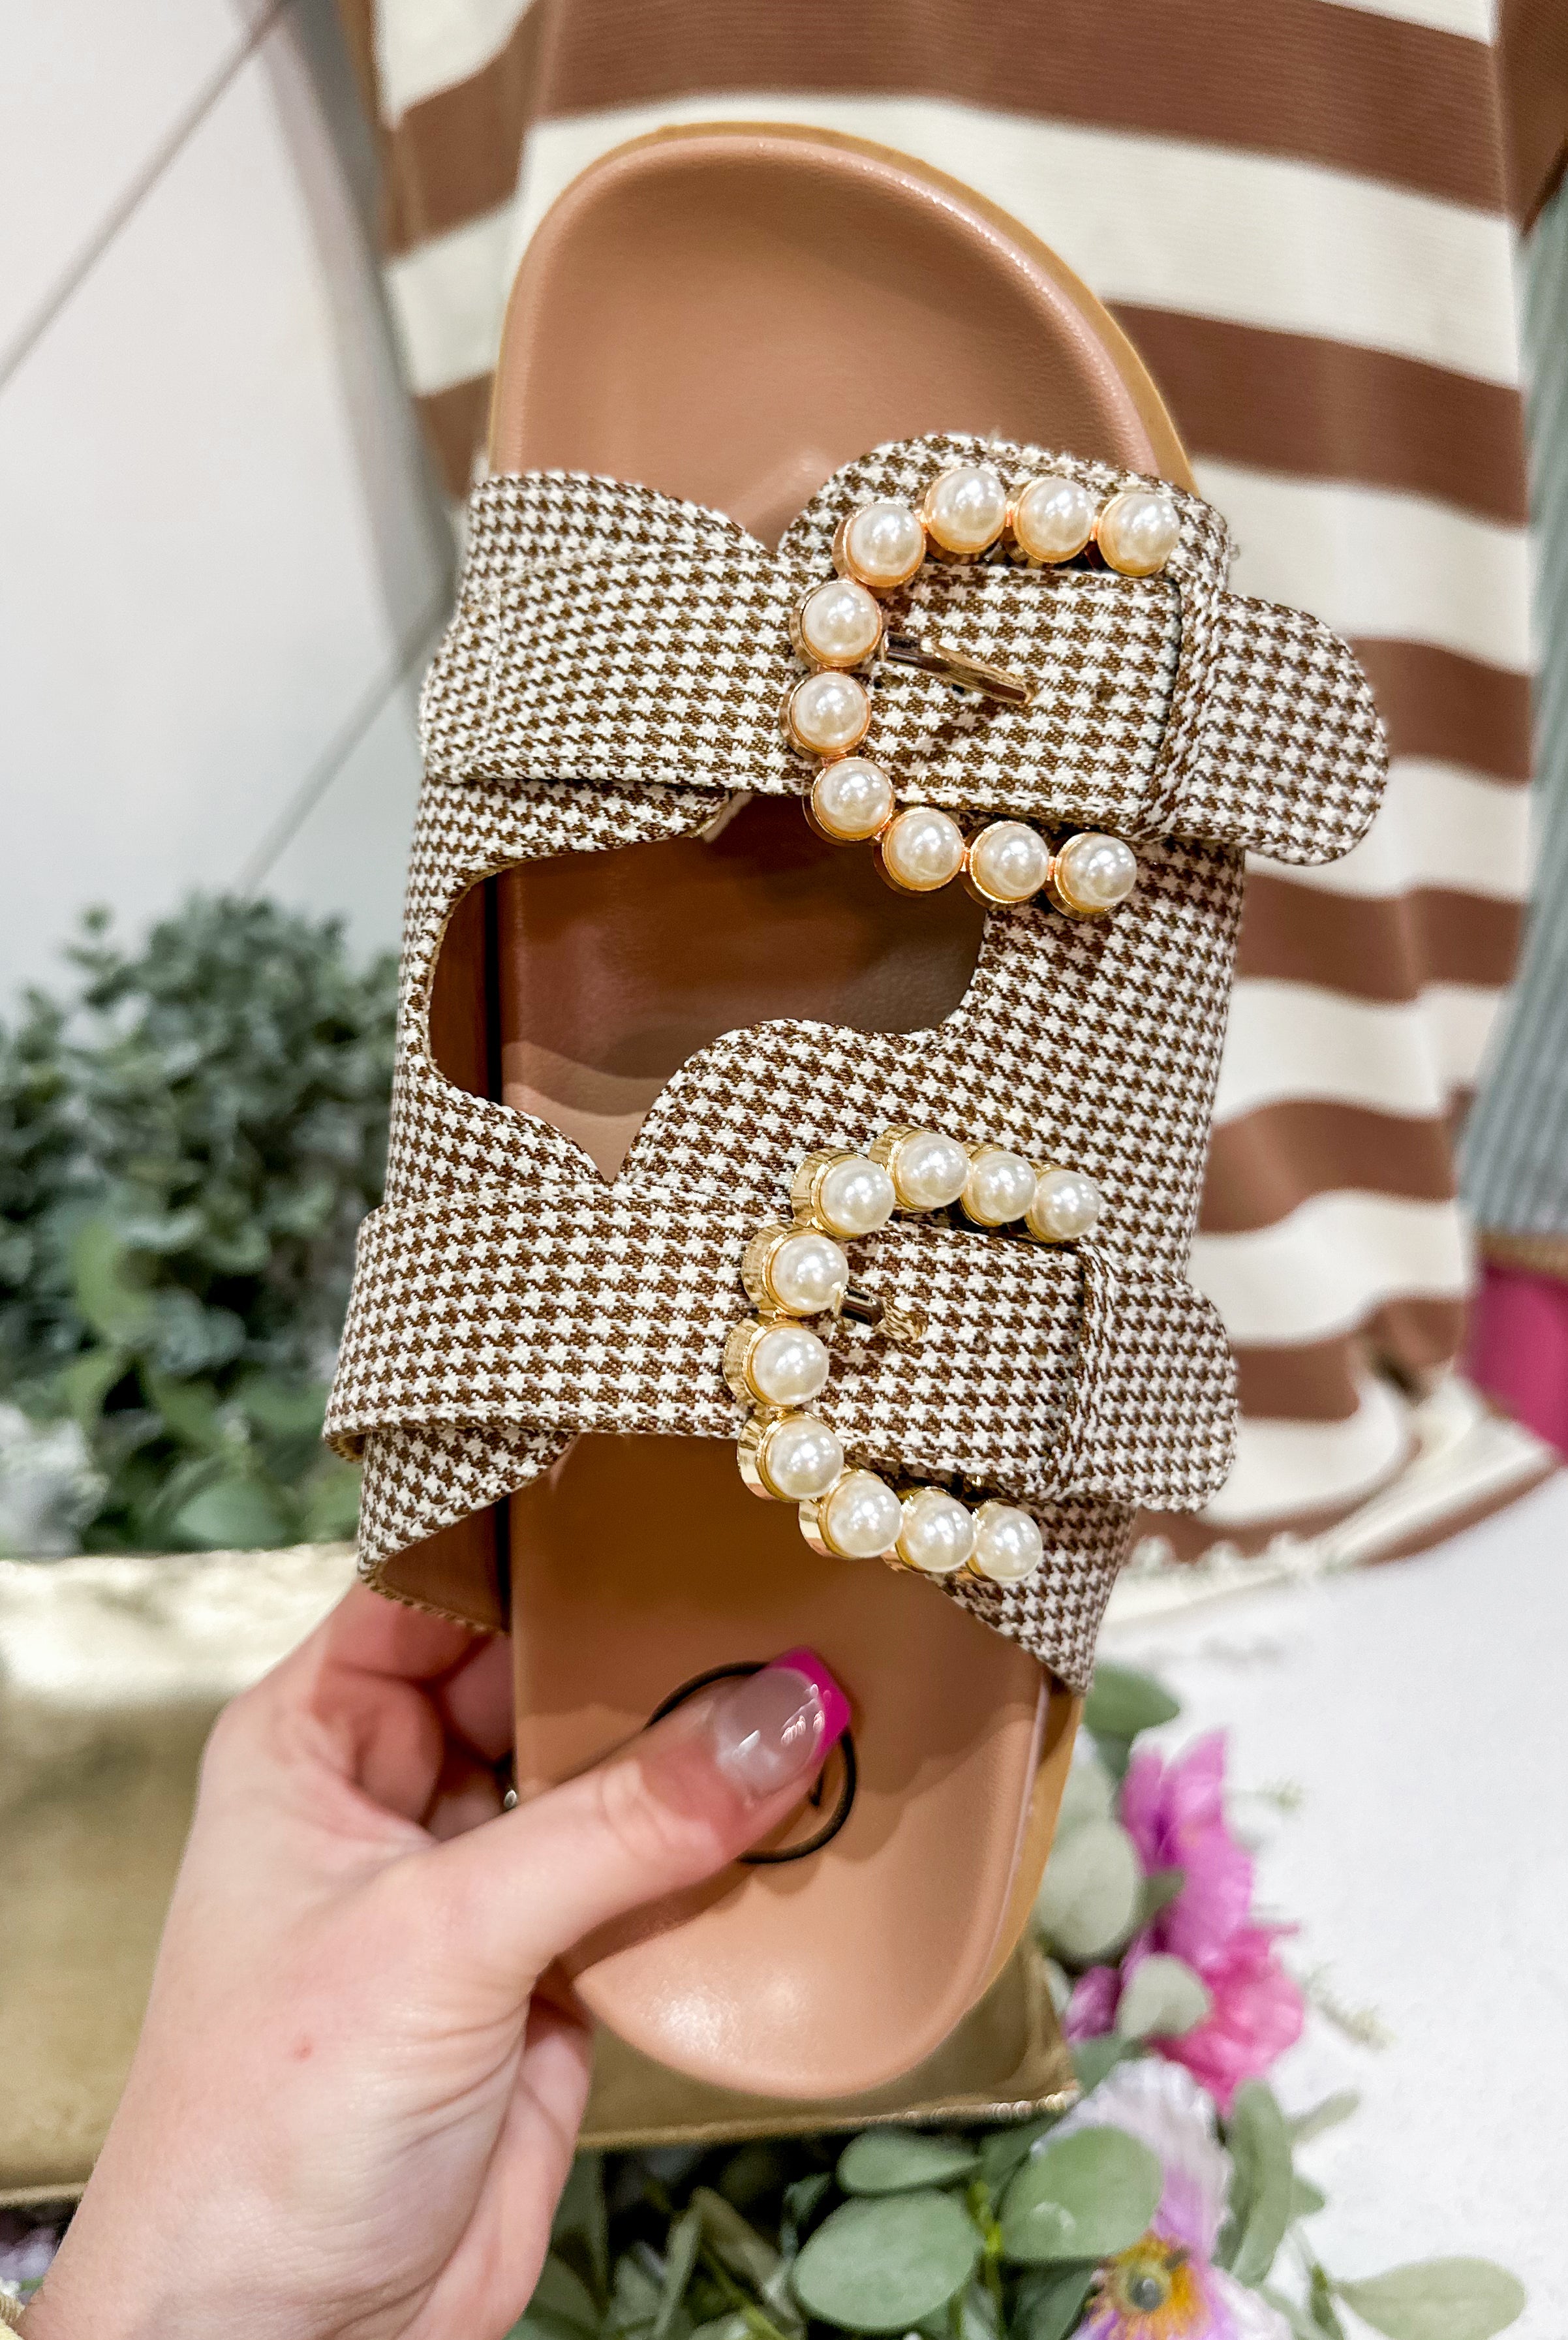 Kelly Nude Check Slides With Pearls - Be You Boutique